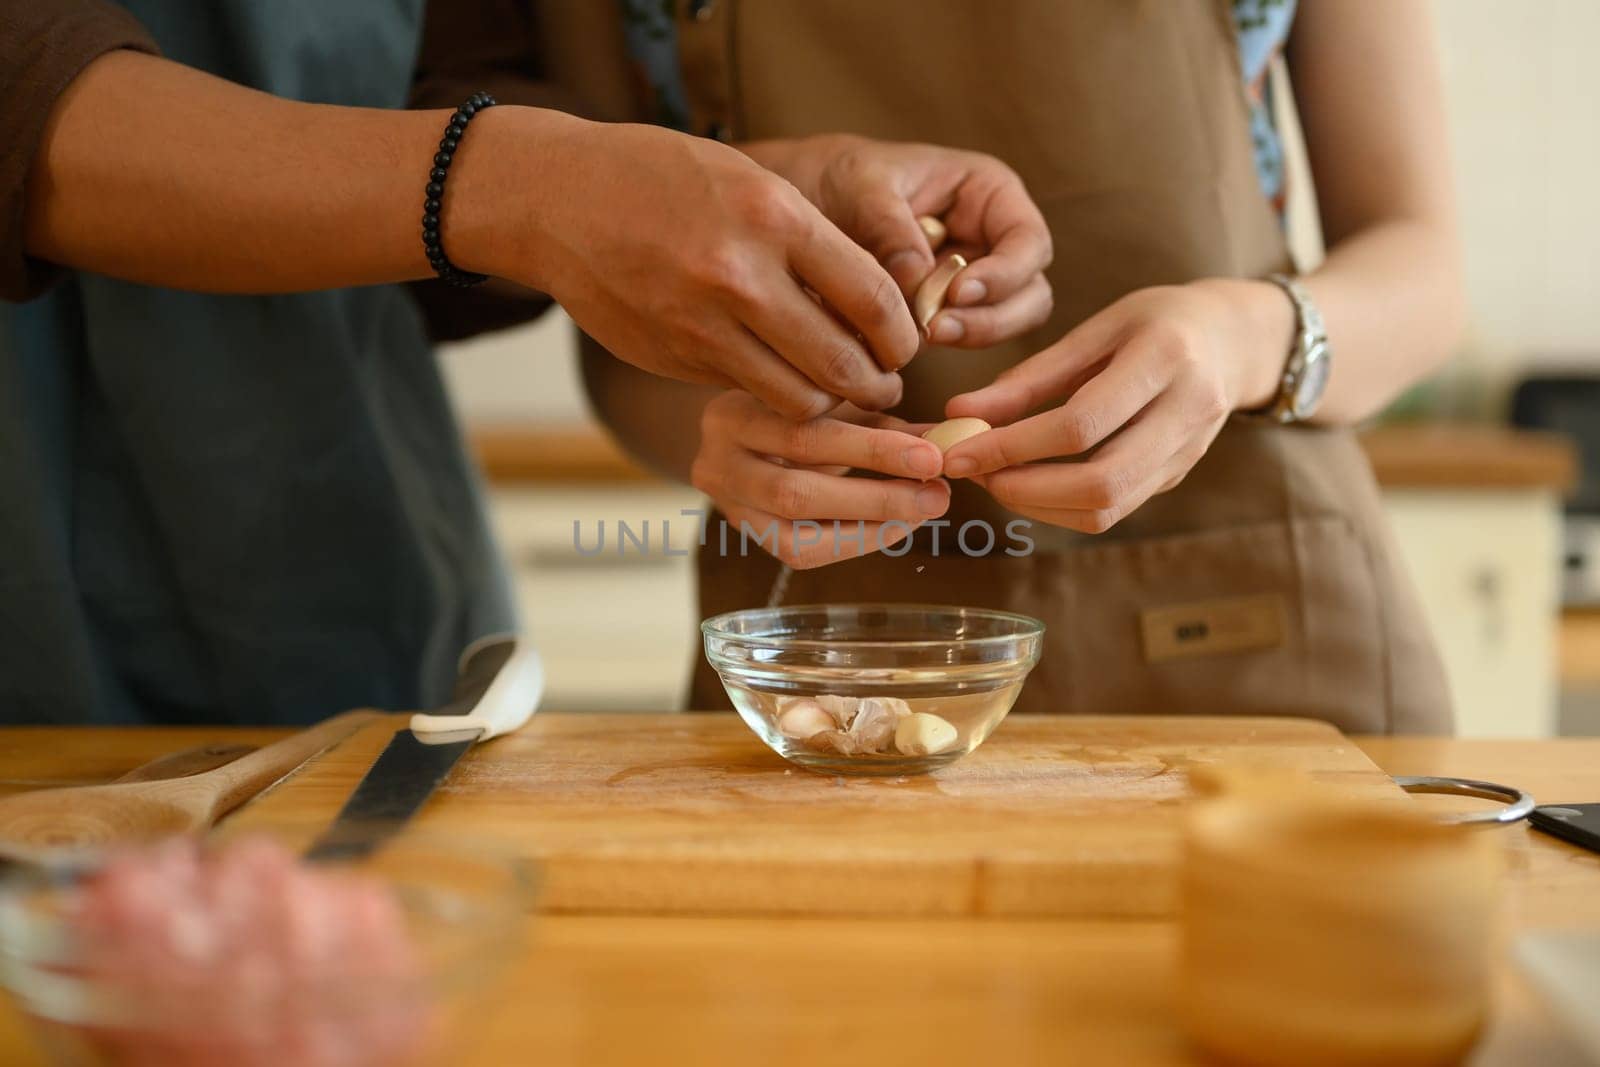 Hands of young couple peeling garlic on wooden chopping board. Healthy lifestyle concept.